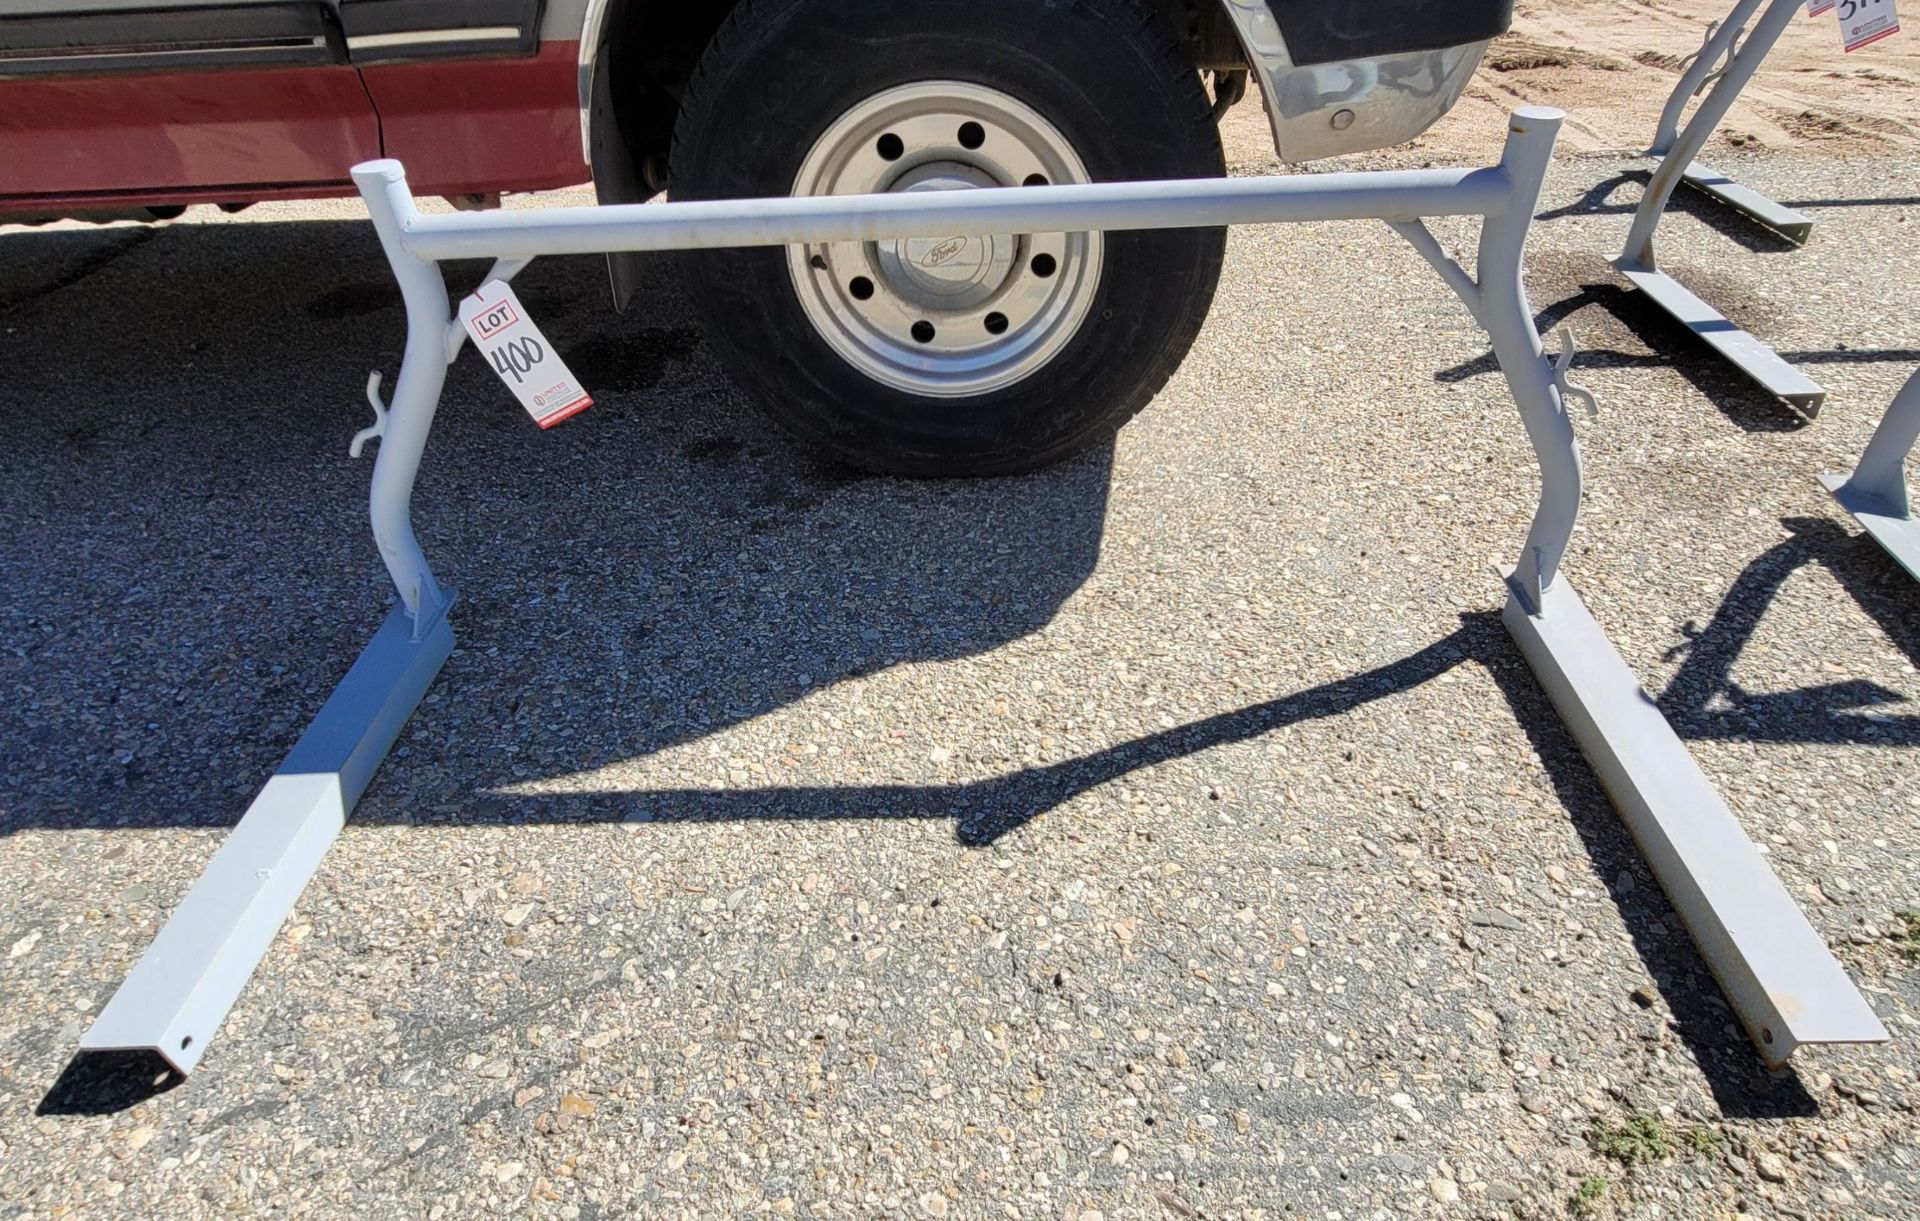 MCWELCO YOKE RACK, 24.5" TALL W/ WELDED ARMS, FITS FULL SIZE CHEVY/GMC